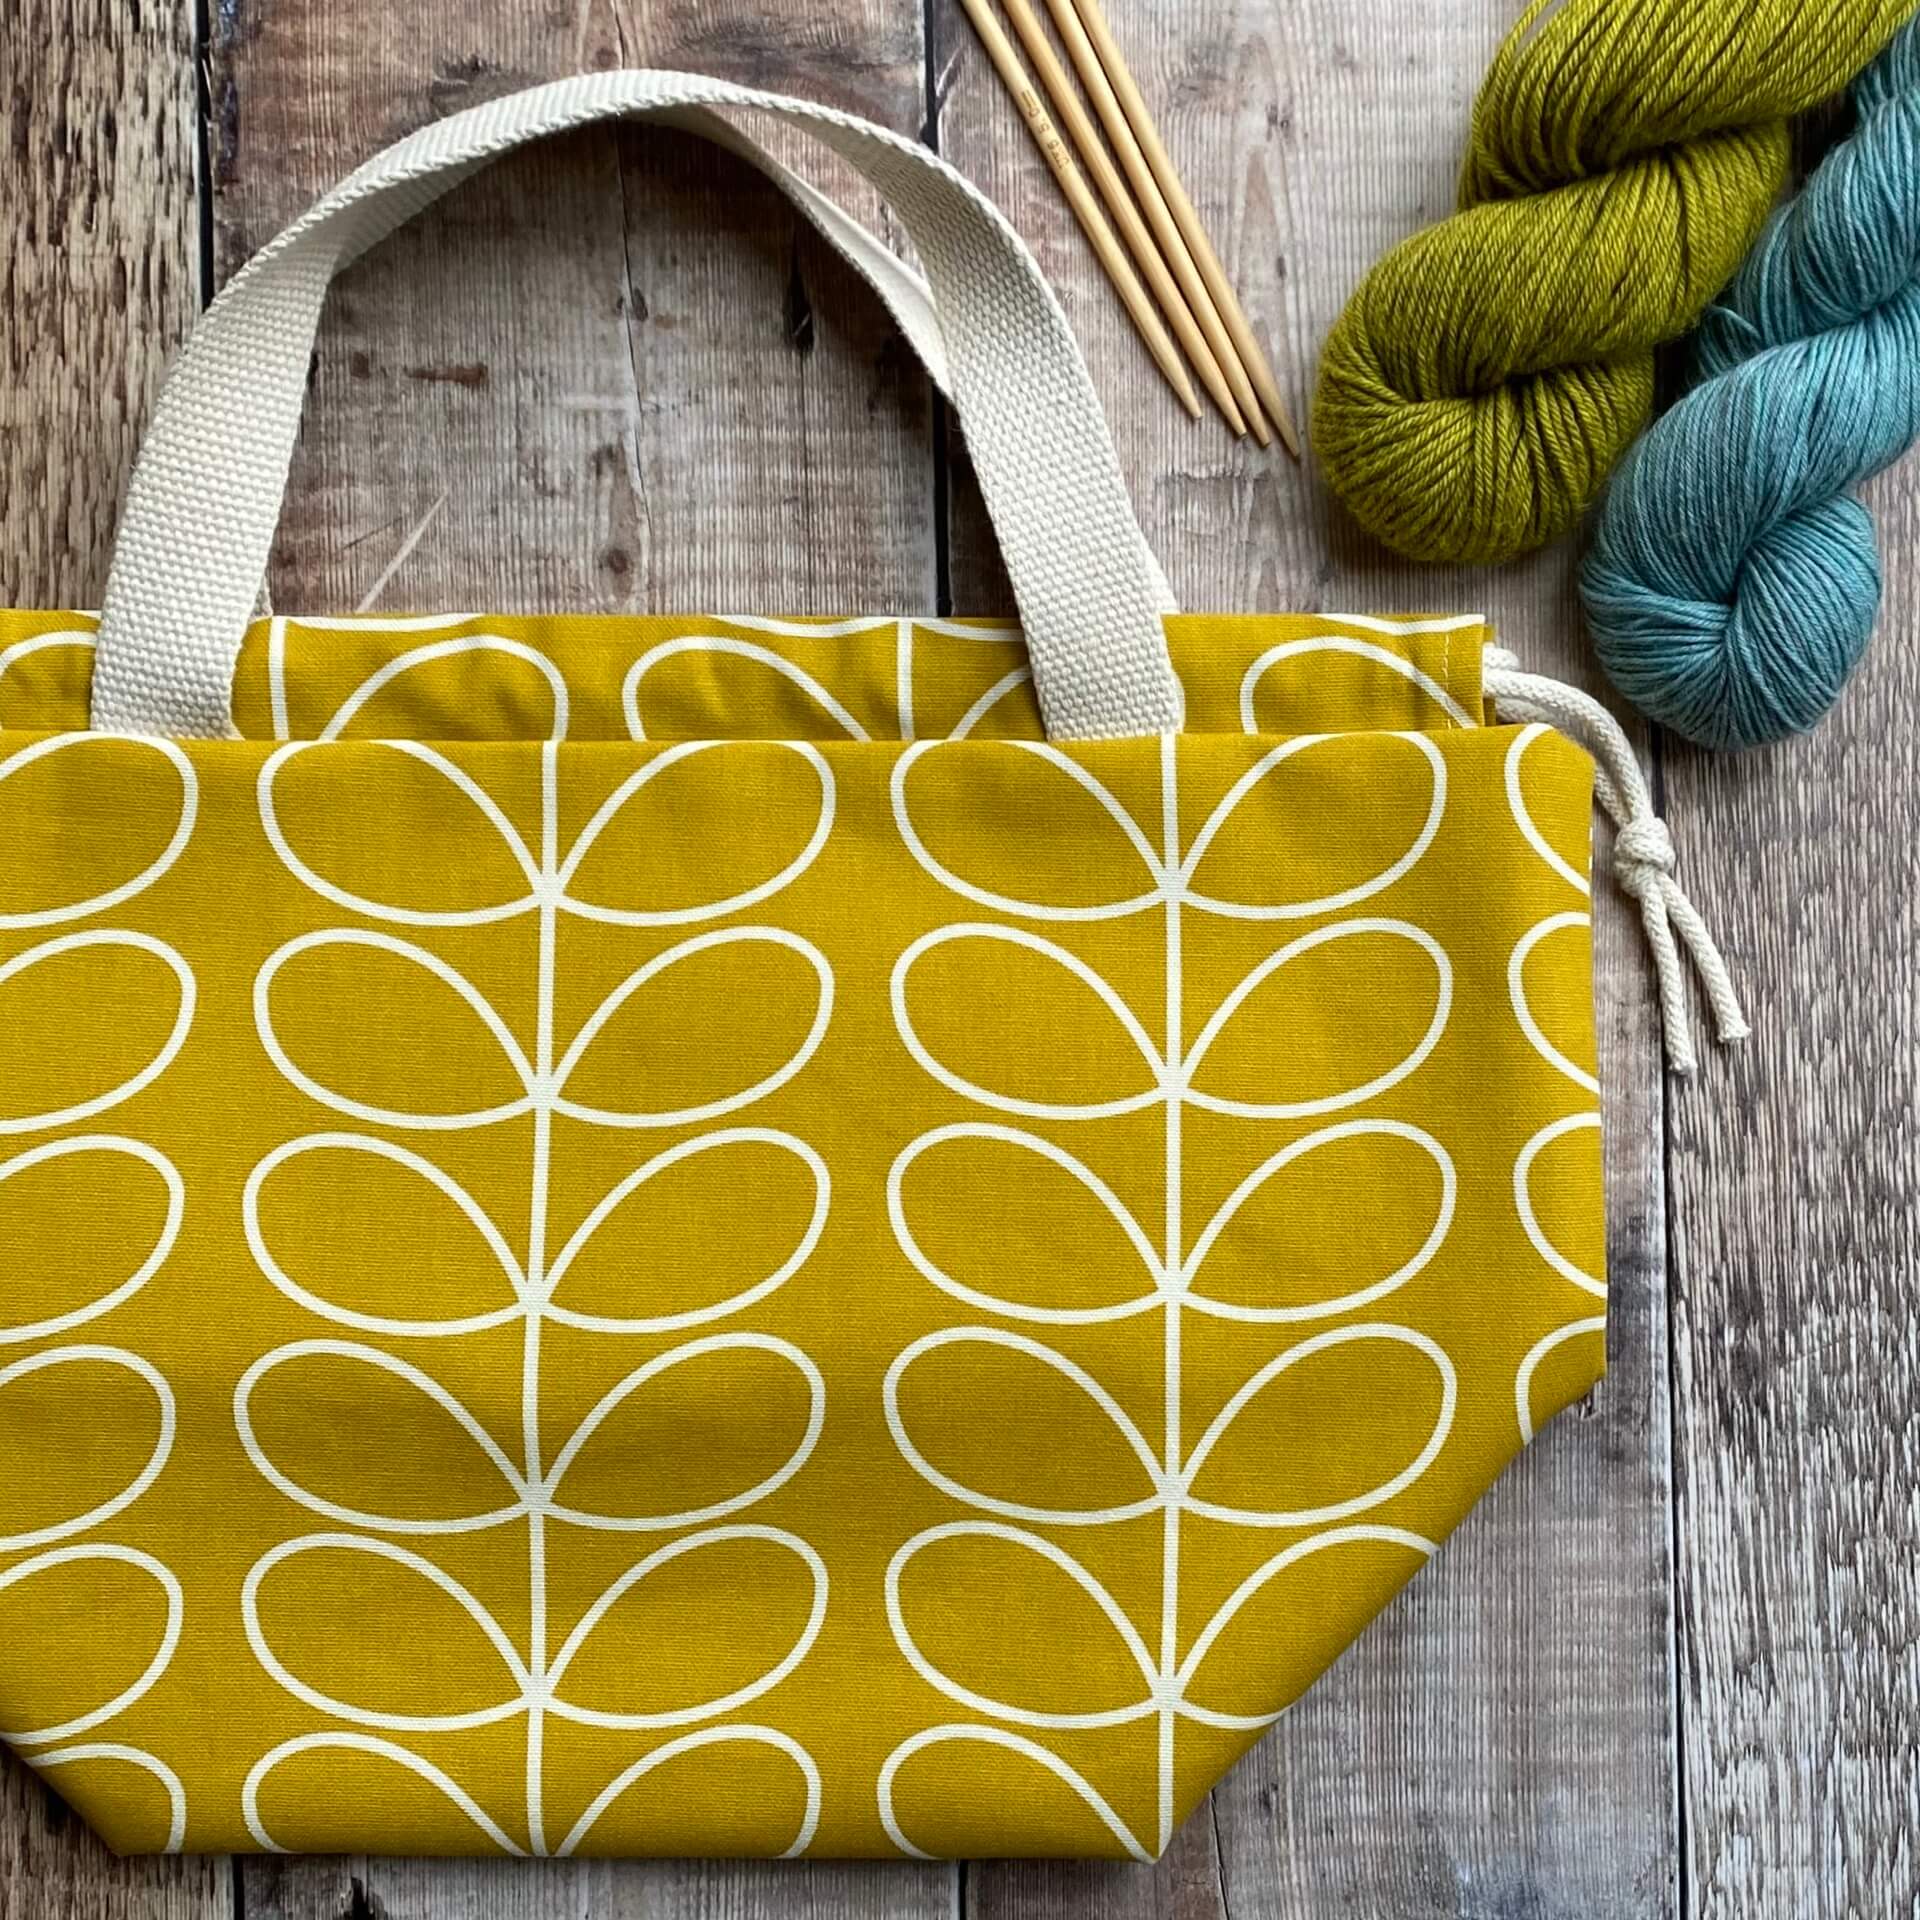 A large knitting project bag lies on a wooden table next to yarn and knitting needles. The bag is handmade using fabric in a cheerful yellow Orla Kiely print. The bag is part of the Eldenwood Craft collection of project bags for knitting. 